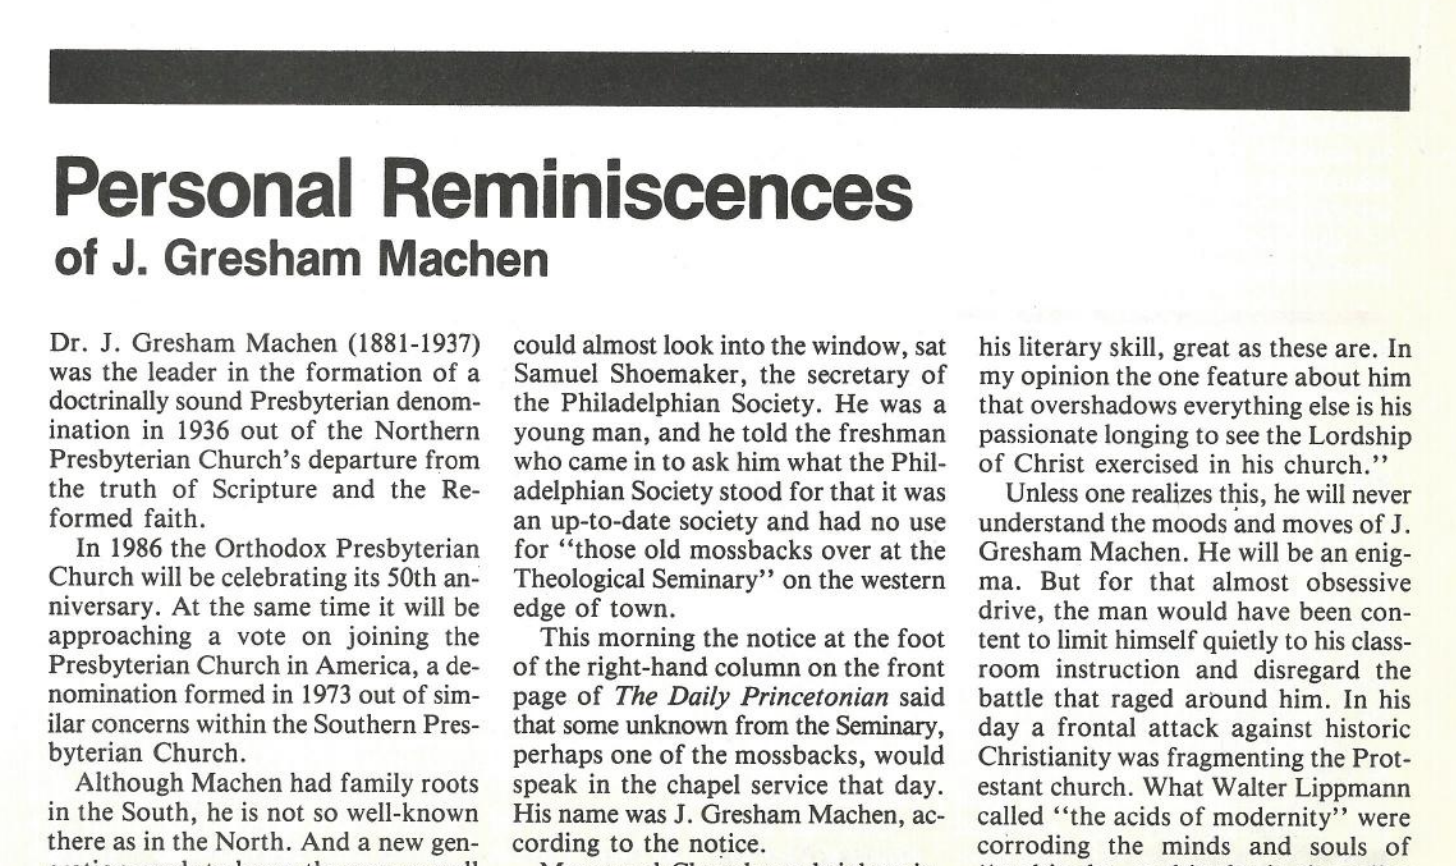 Ten friends and acquaintances of J. Gresham Machen share memories of him fifty years after his death.